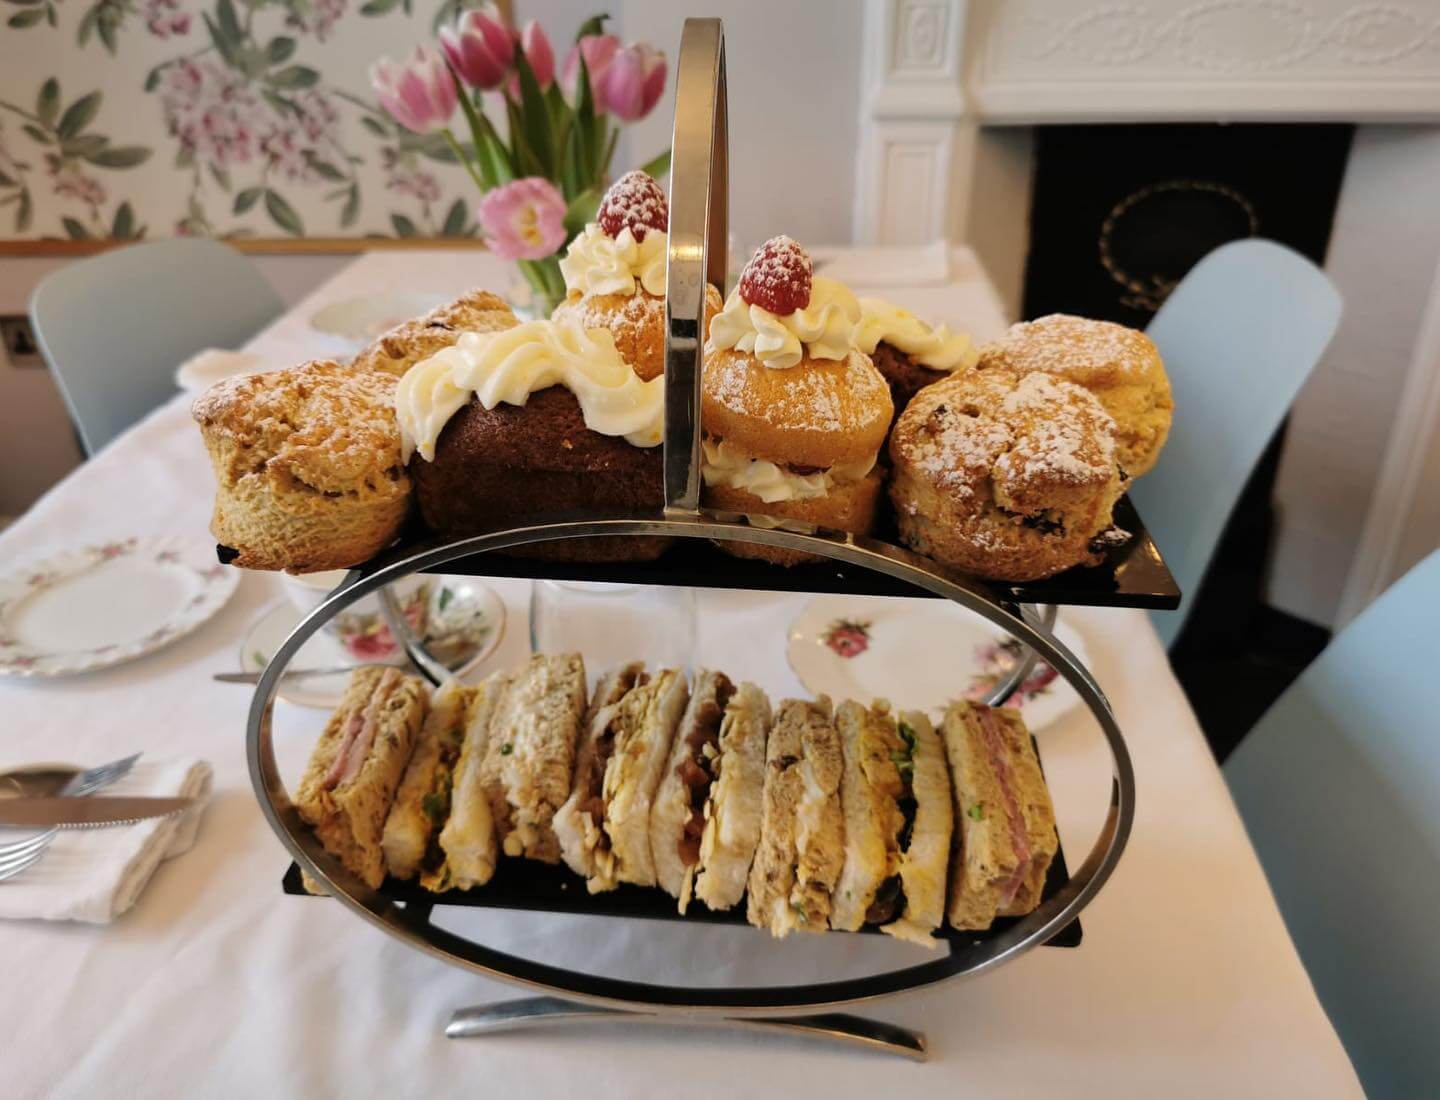 Afternoon tea at The Gilt Rooms, Essex, England